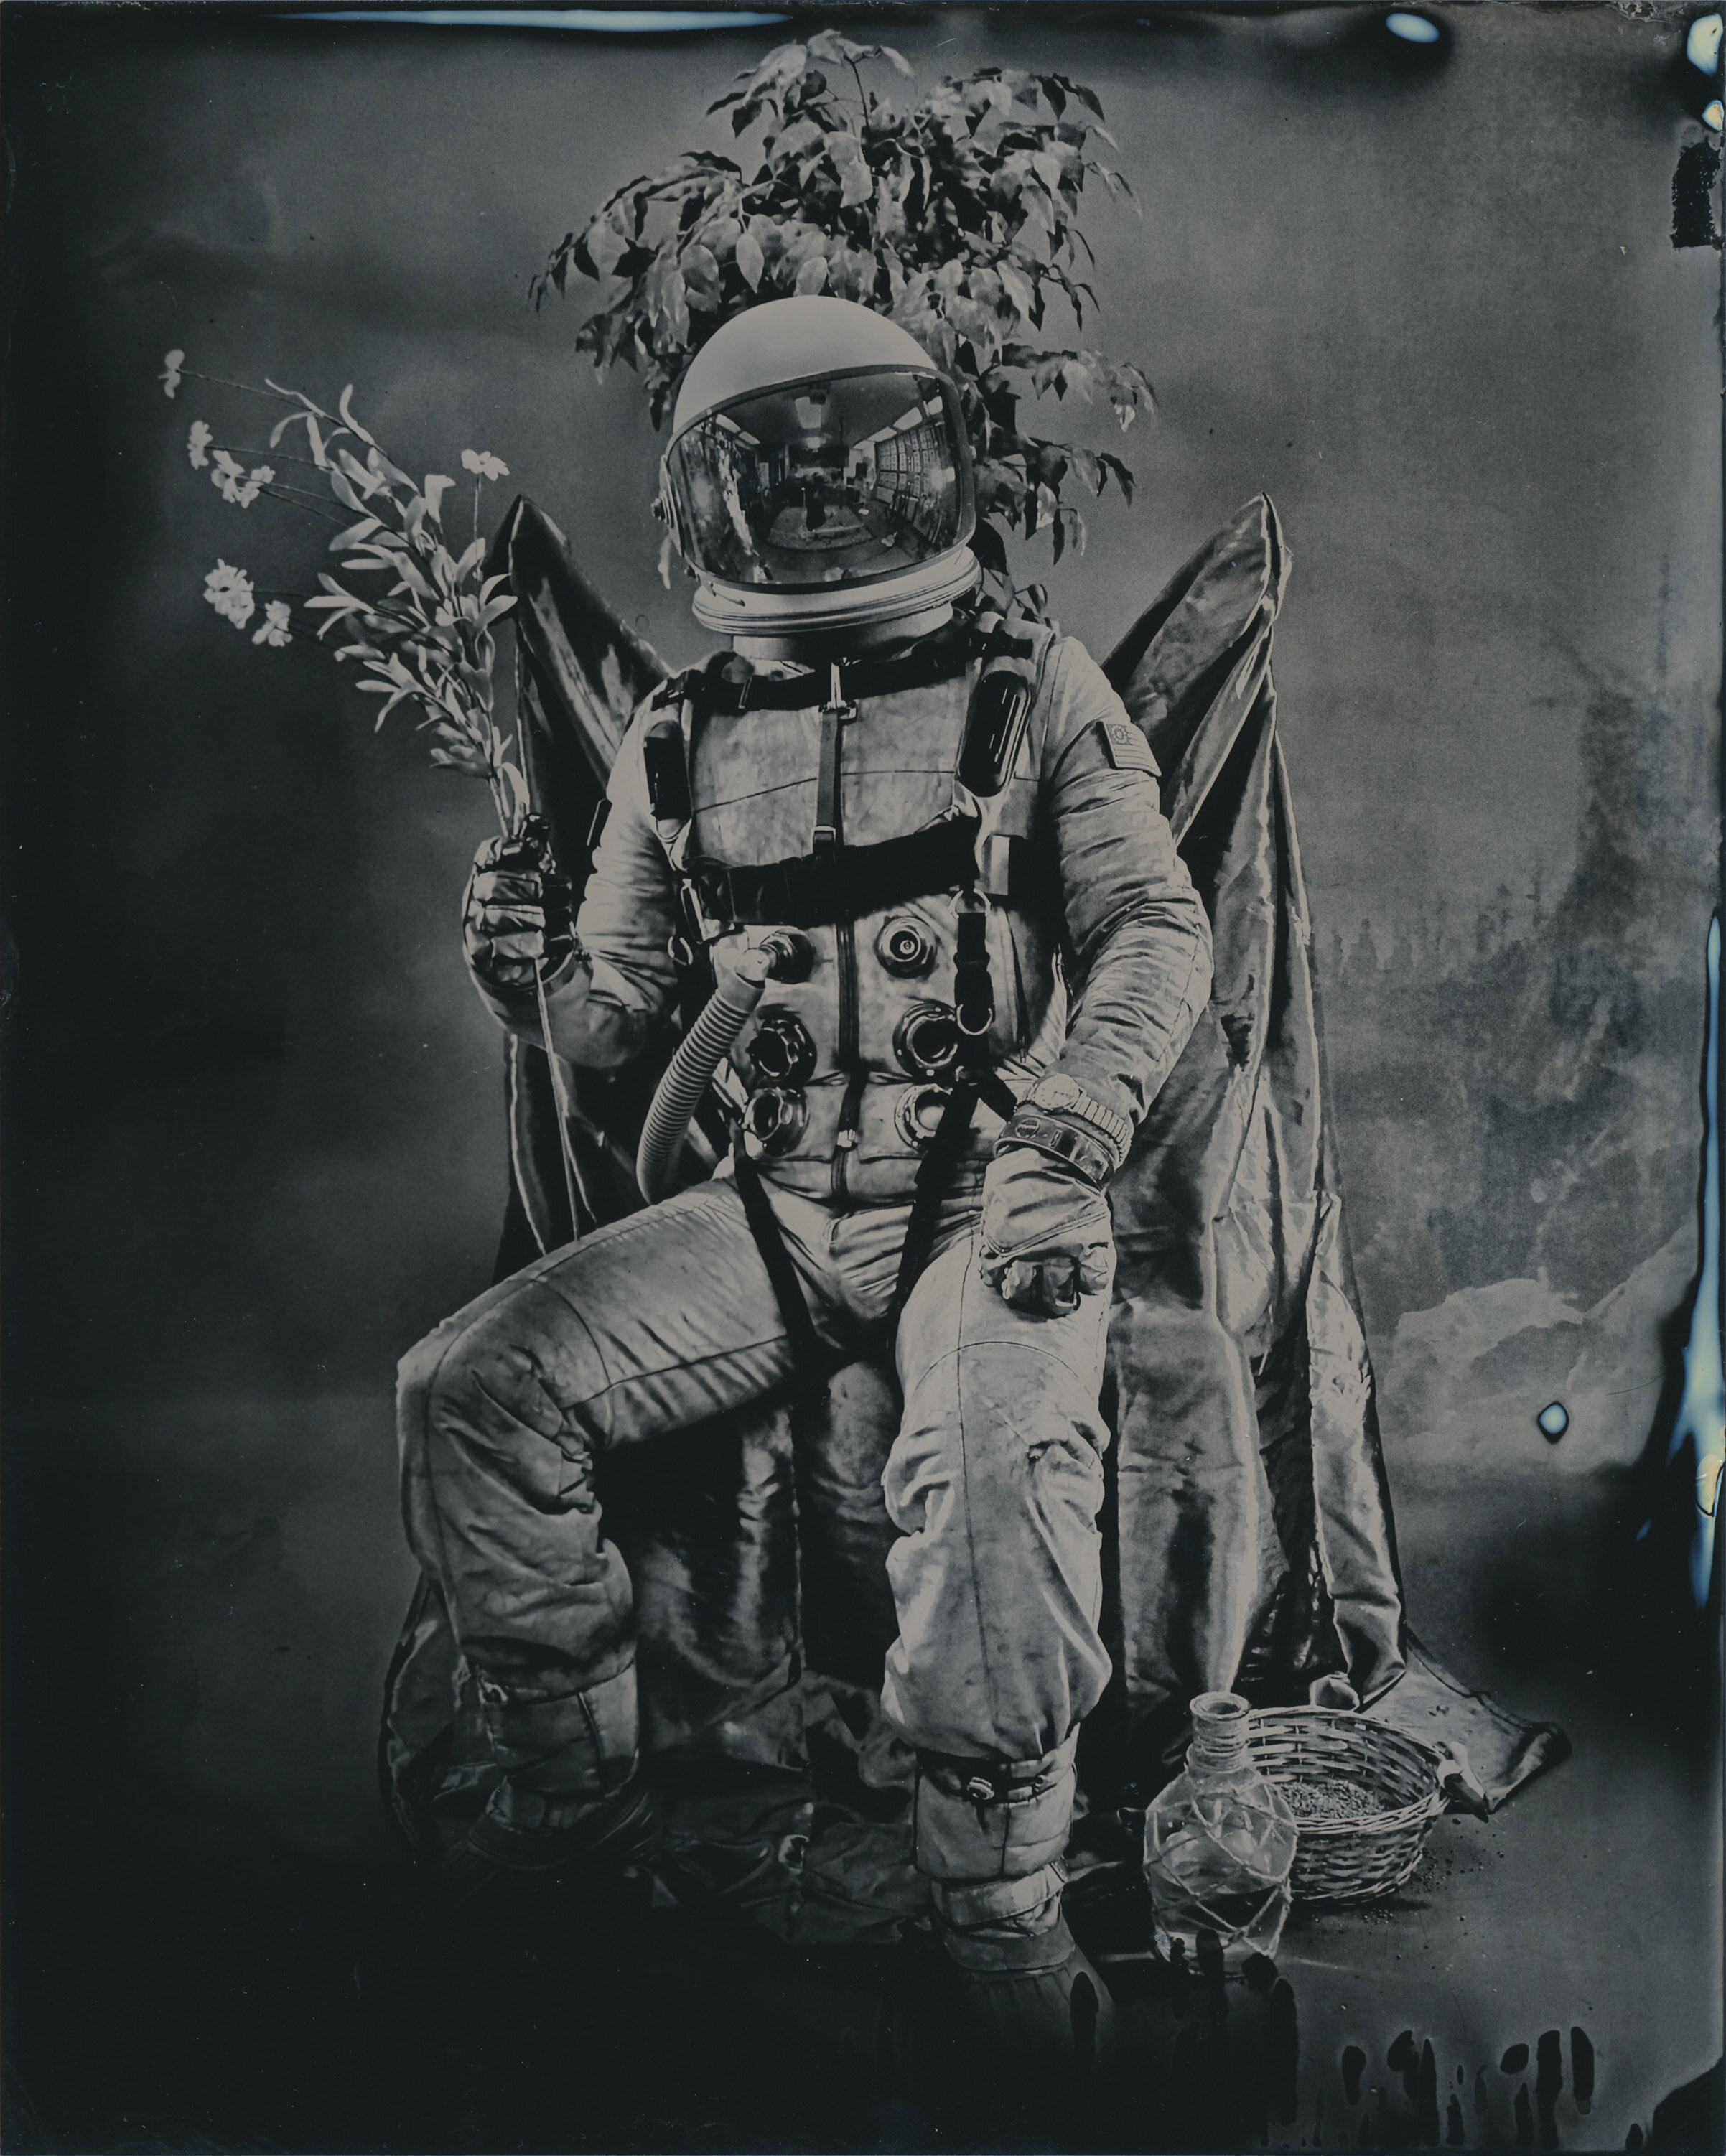   “Spring Seated Upon a Throne”   2020  Tintype  8x10 